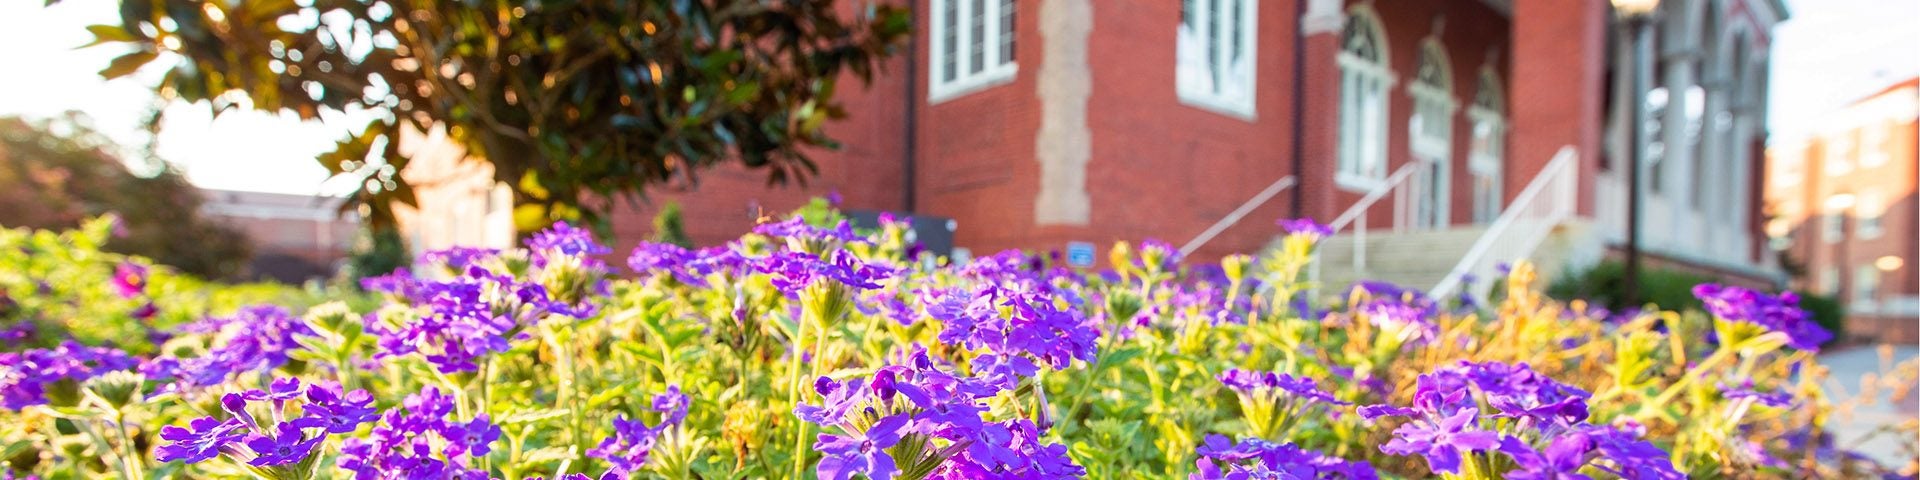 Purple flowers color the landscape near Wright Auditorium on the campus of ECU on Tuesday, Aug. 7, 2018. (ECU Photo by Rhett Butler)